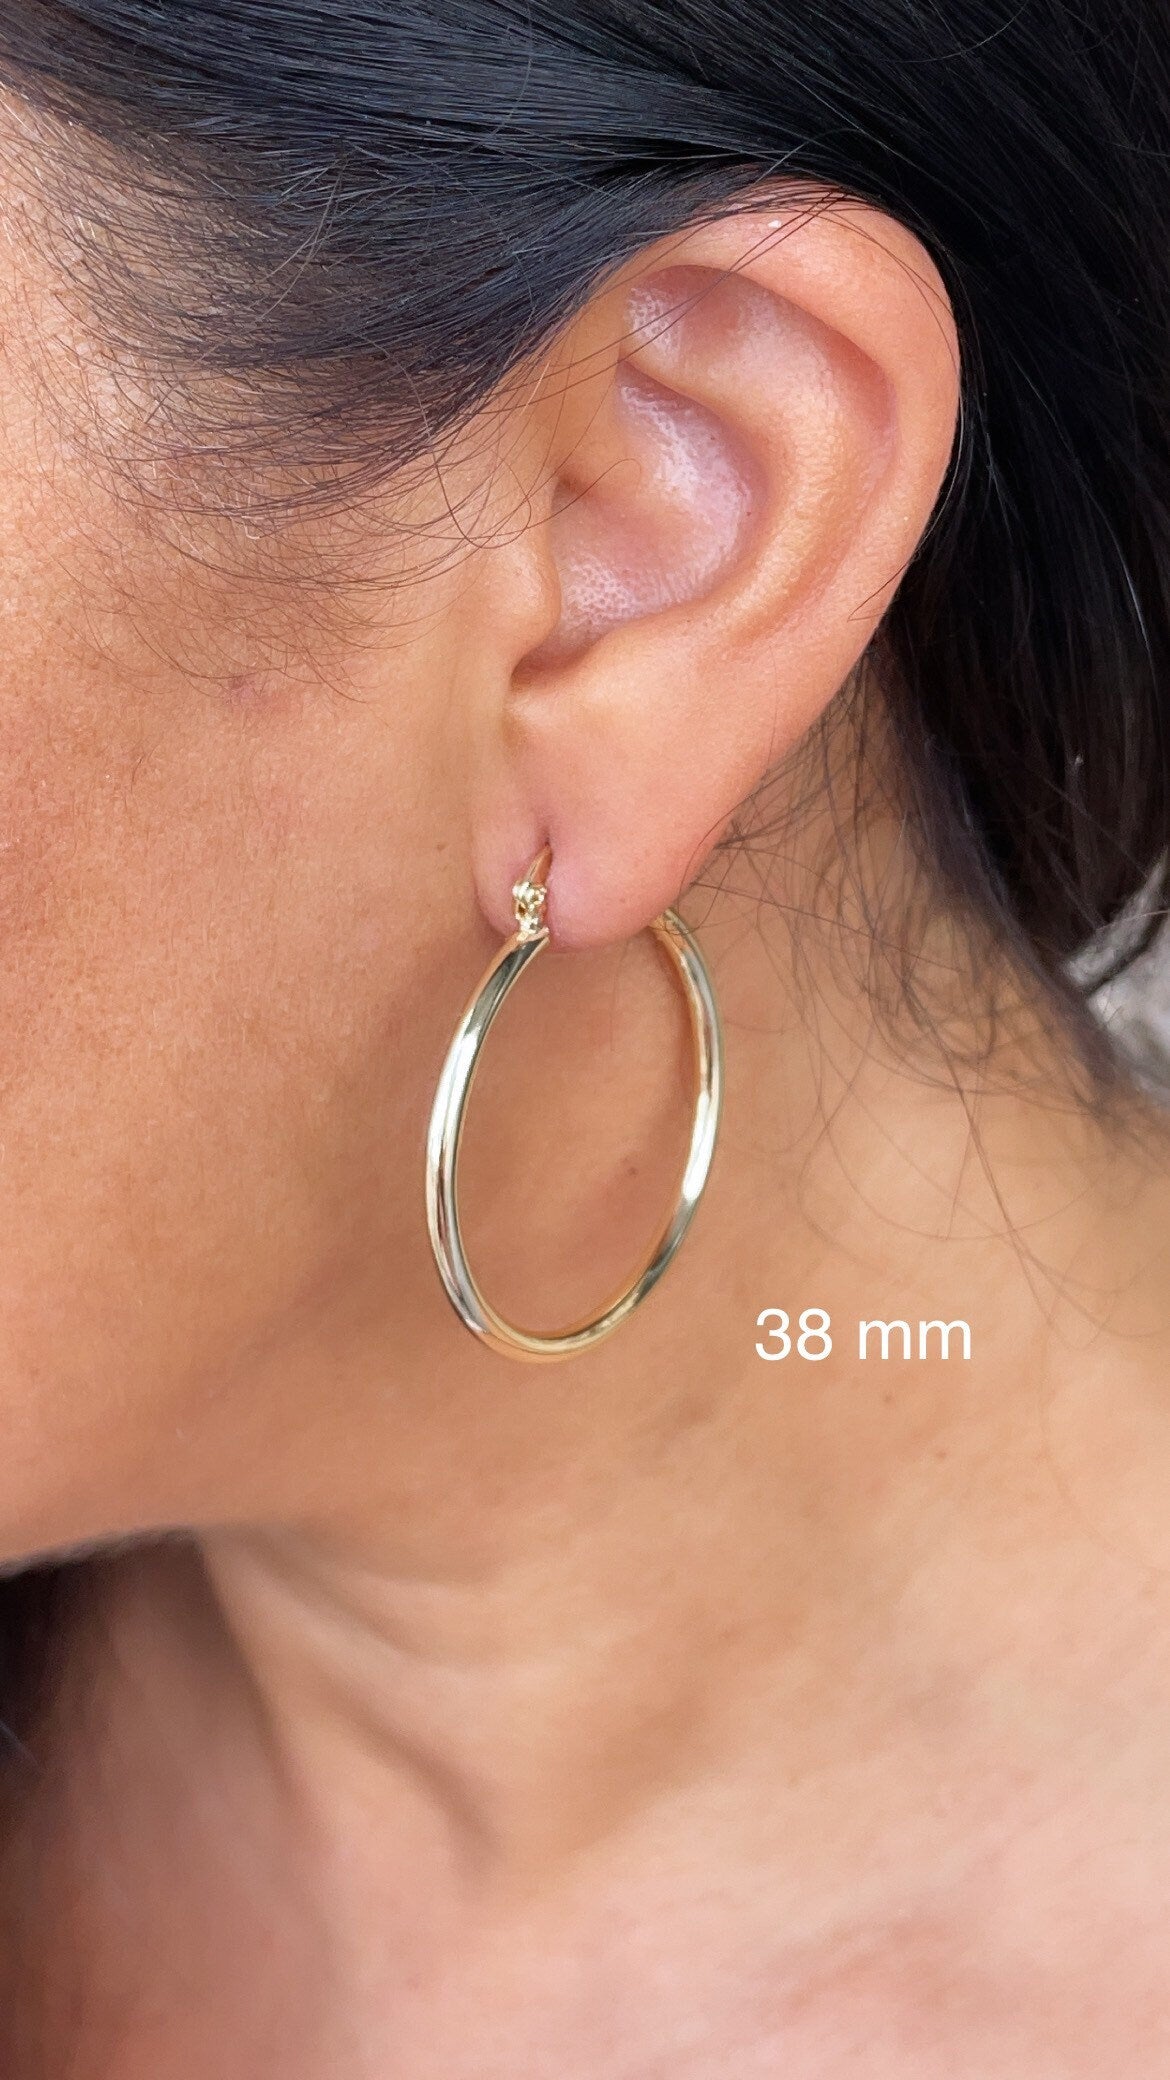 18k Gold Layered Plain Hoop Earrings Available Small, Medium, Large Sizes For the